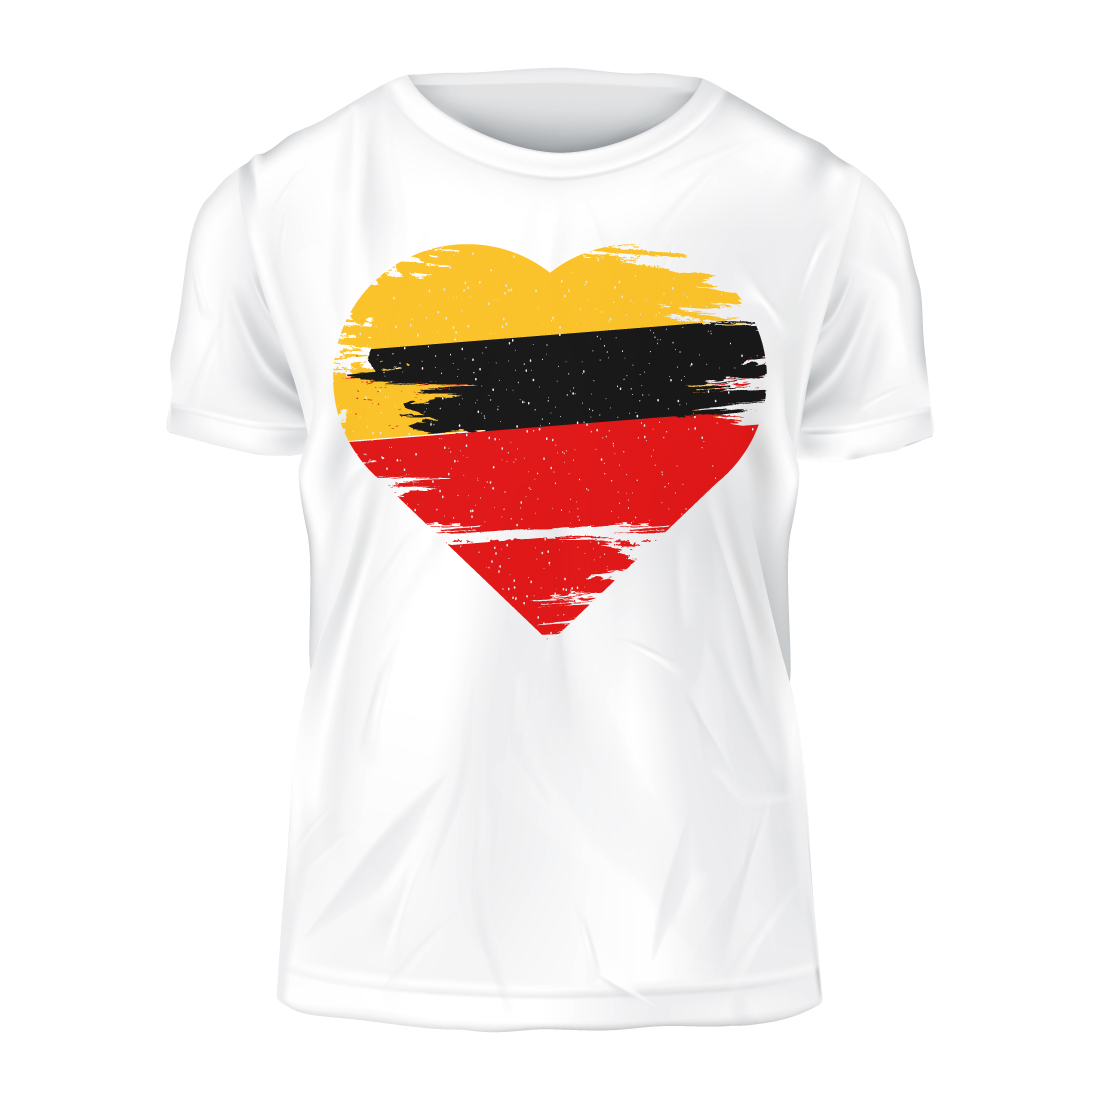 Germany T-shirt Design cover image.